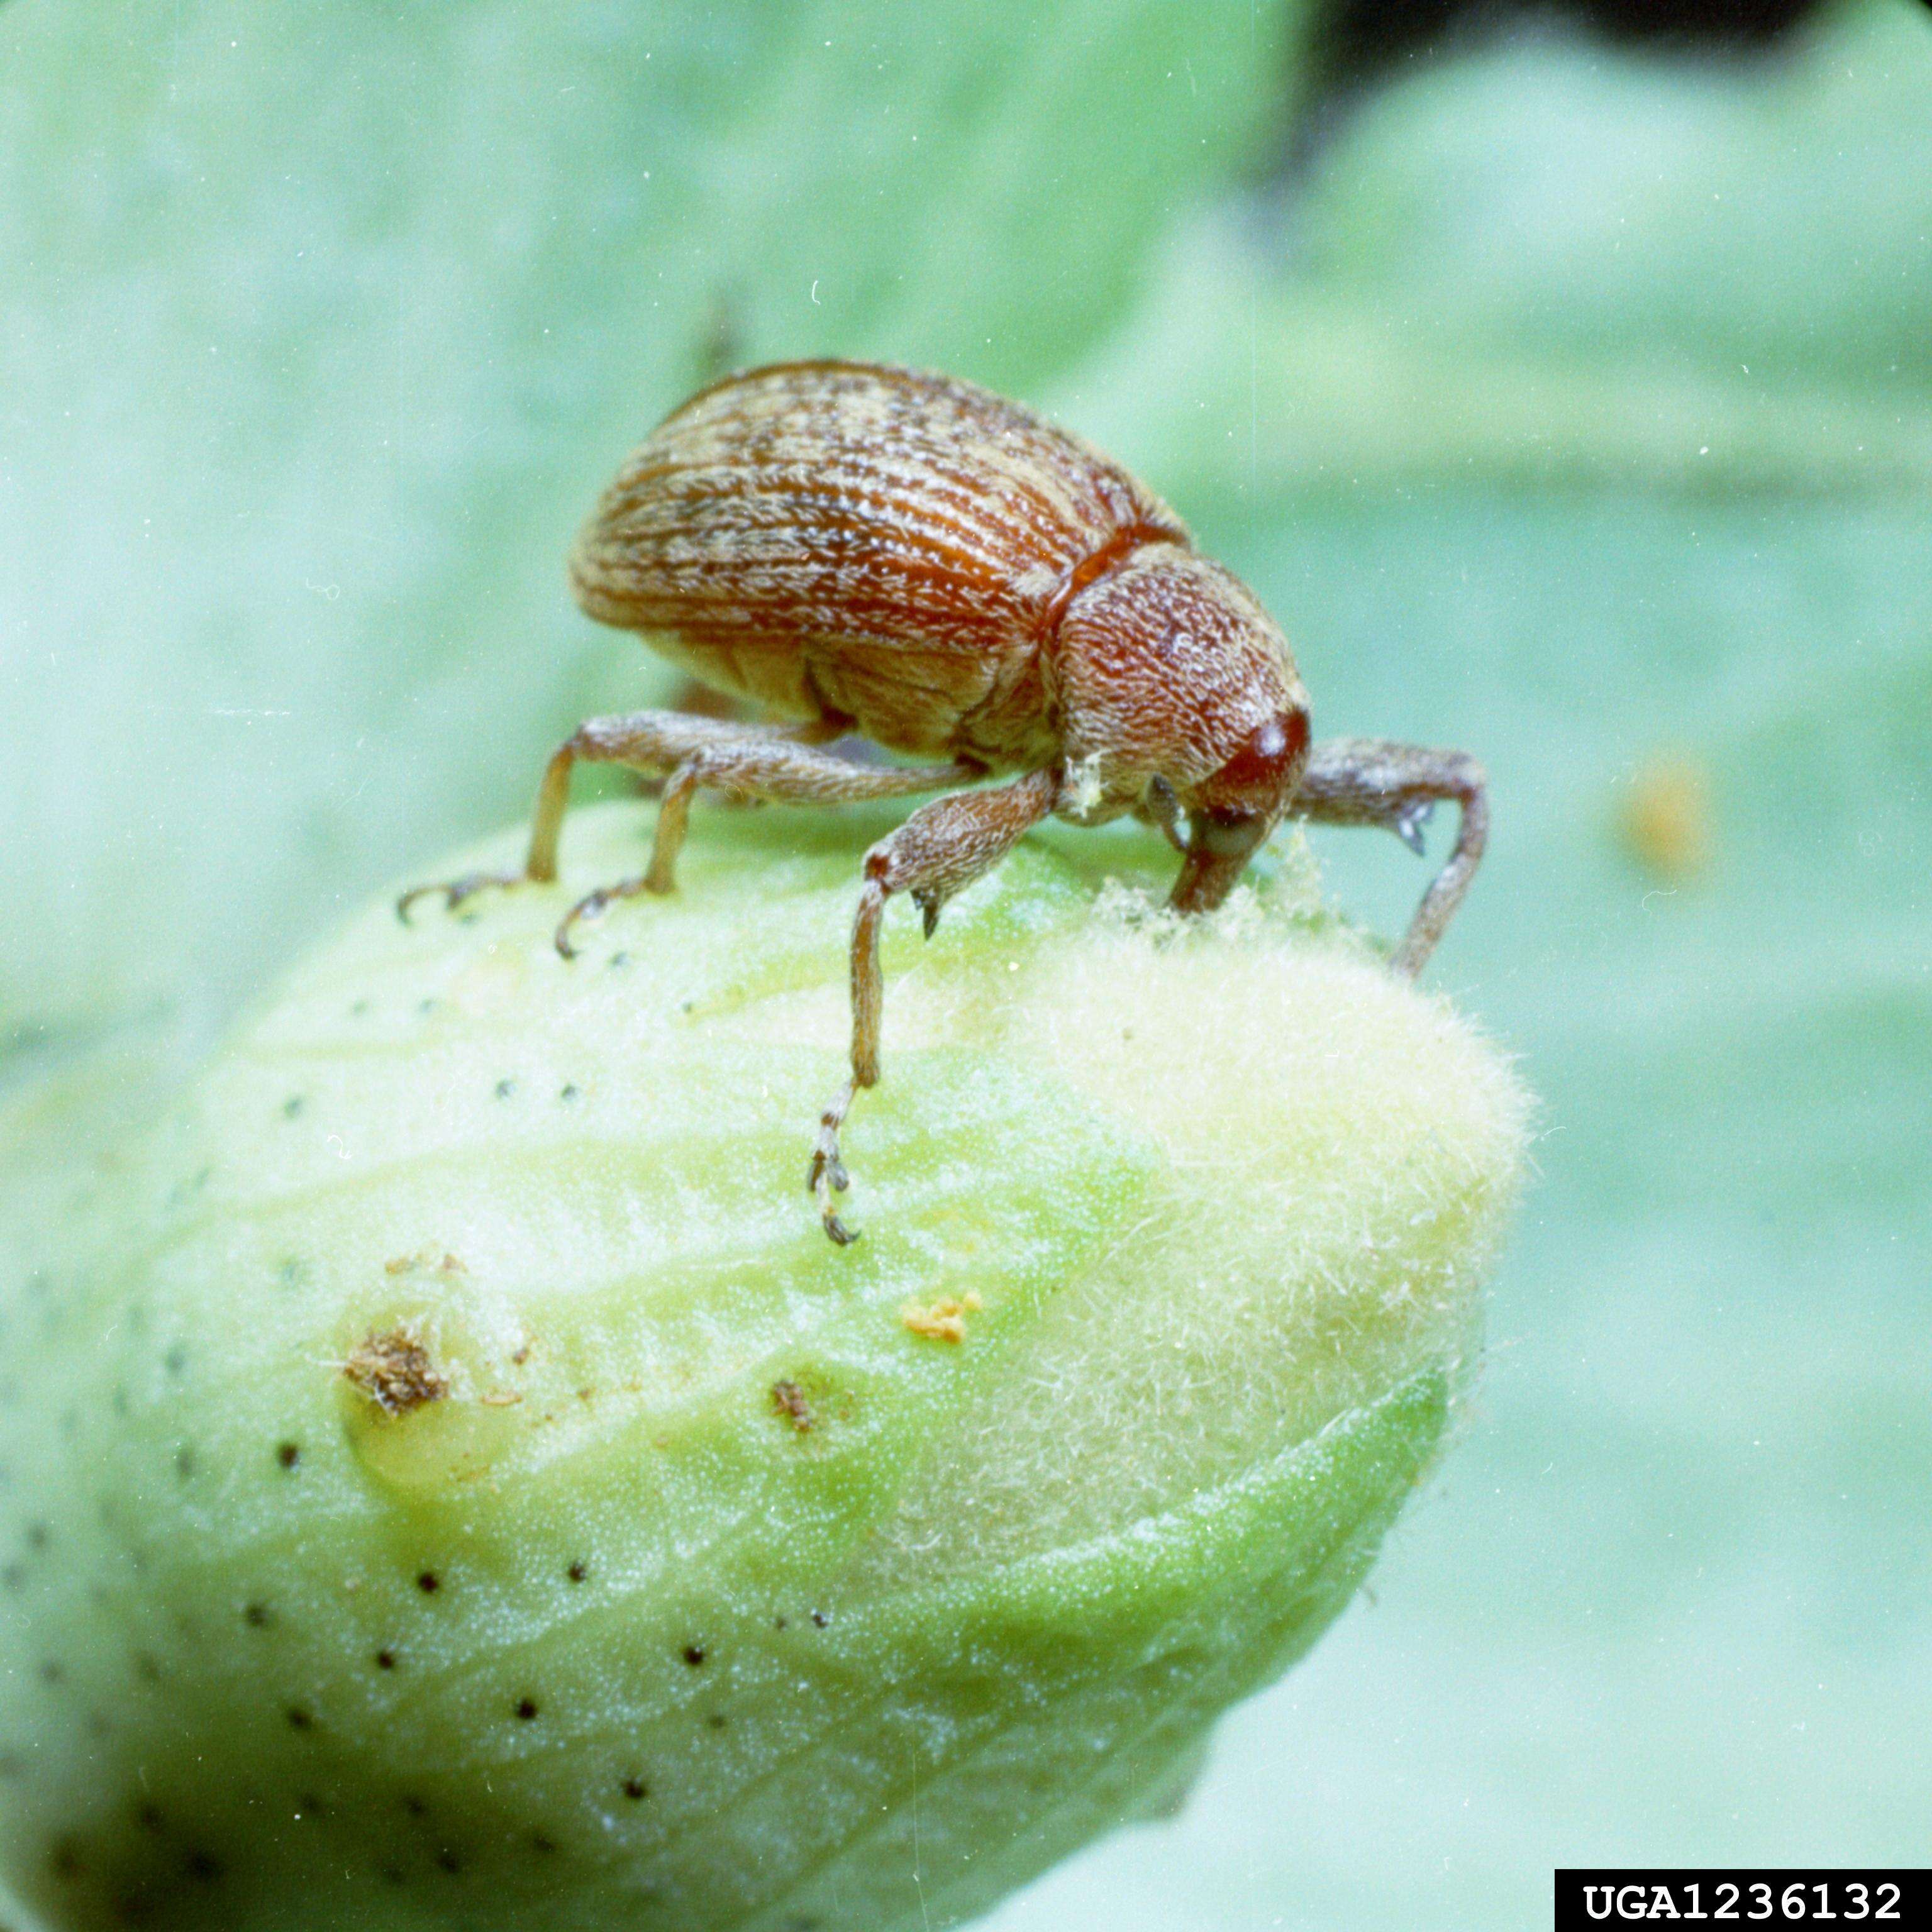 Top view of a brownish-red boll weevil adult on an immature cotton boll.